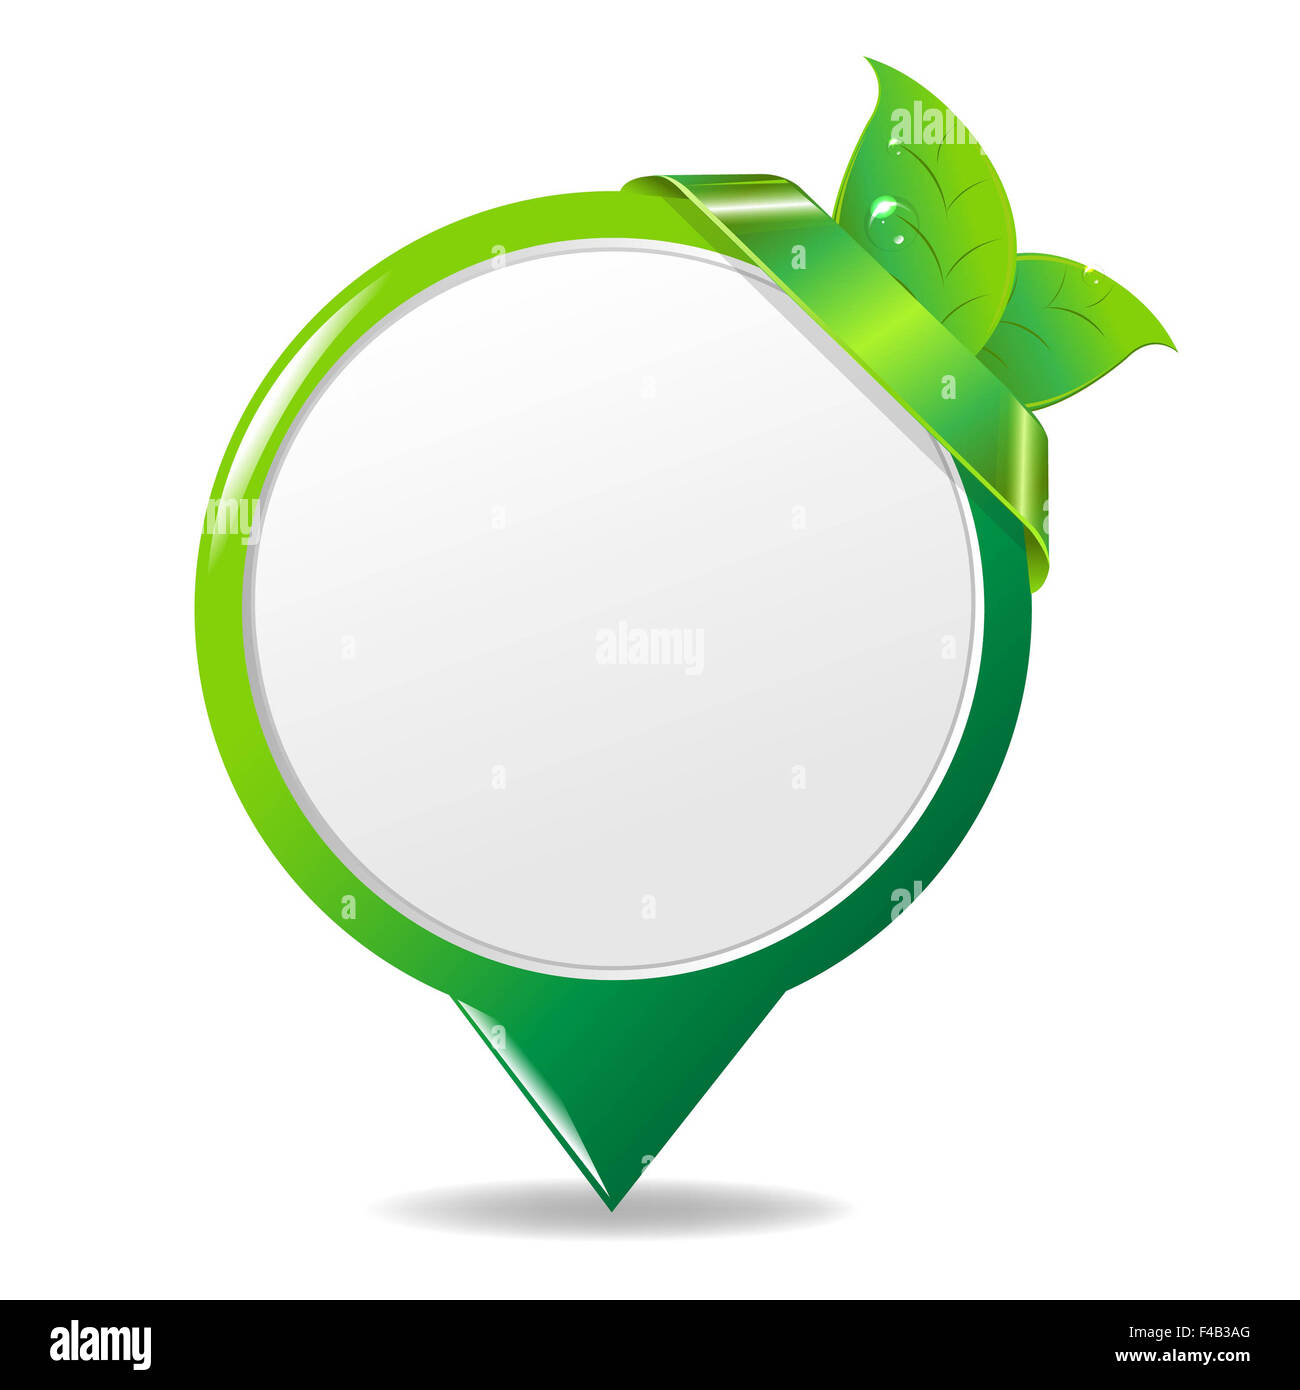 Green Eco Label With Leaf Stock Photo